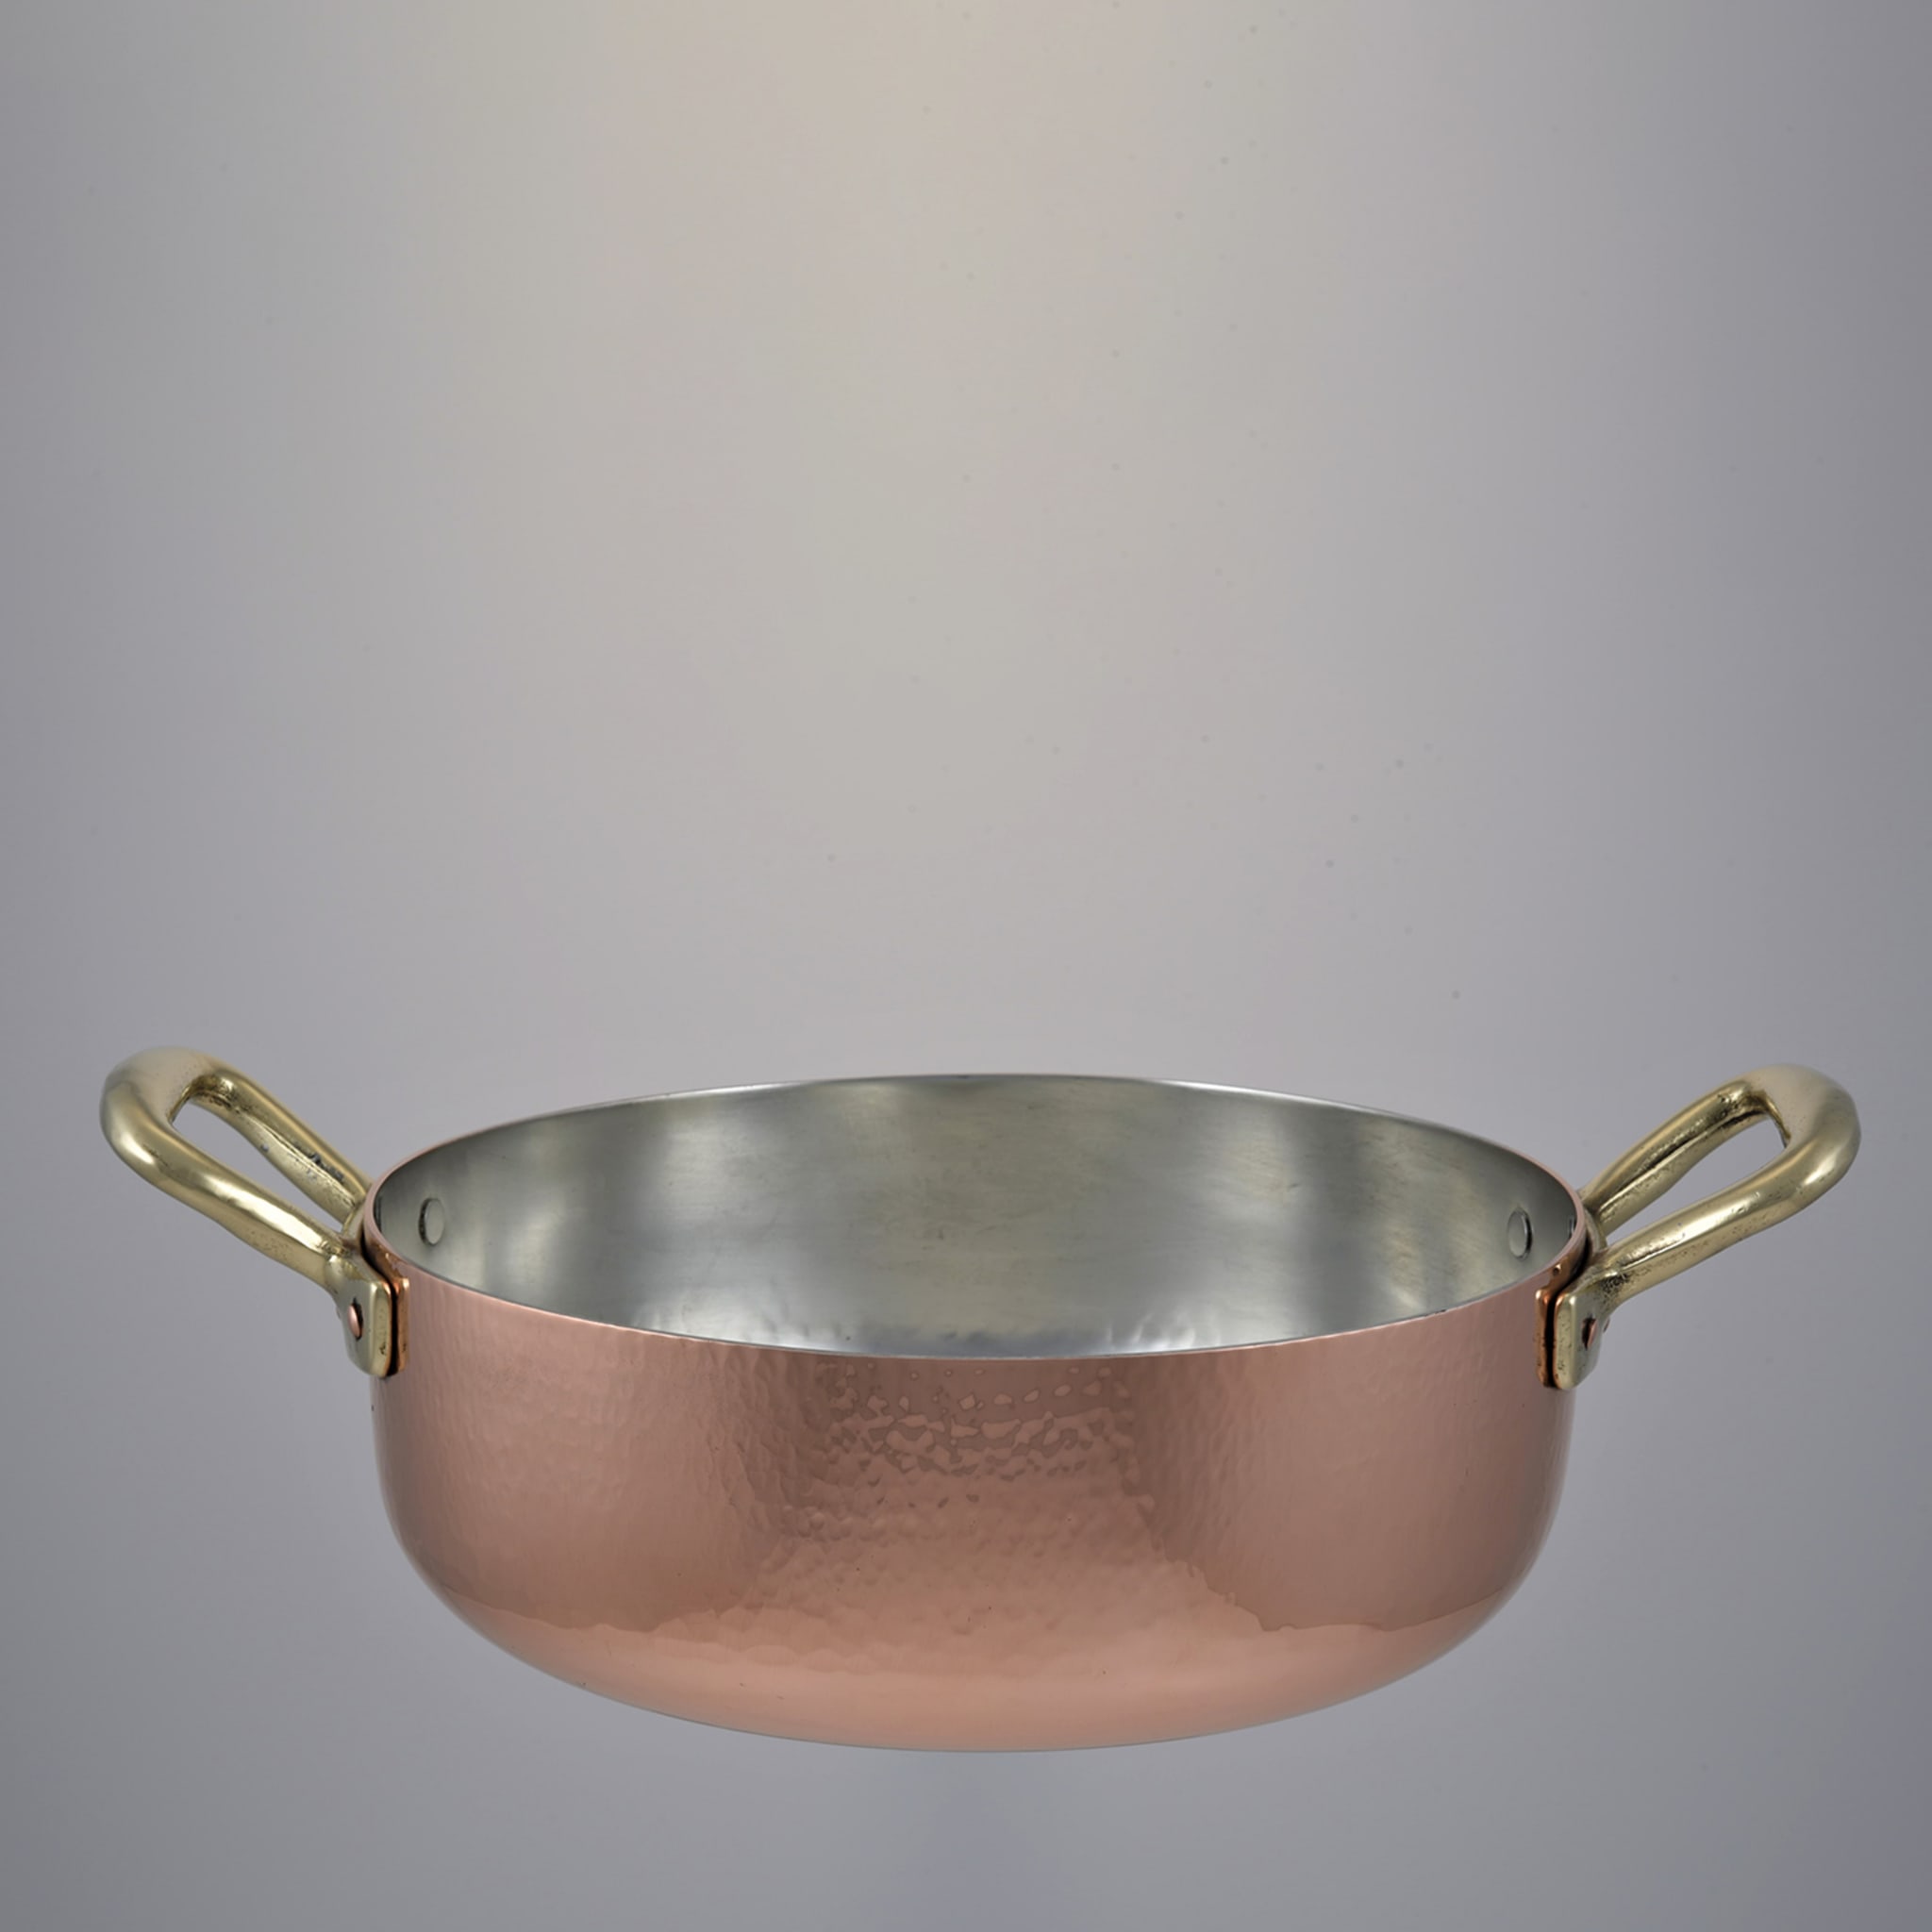 Silver lined 2-Handle Copper Pot with Lid #2 - Alternative view 1